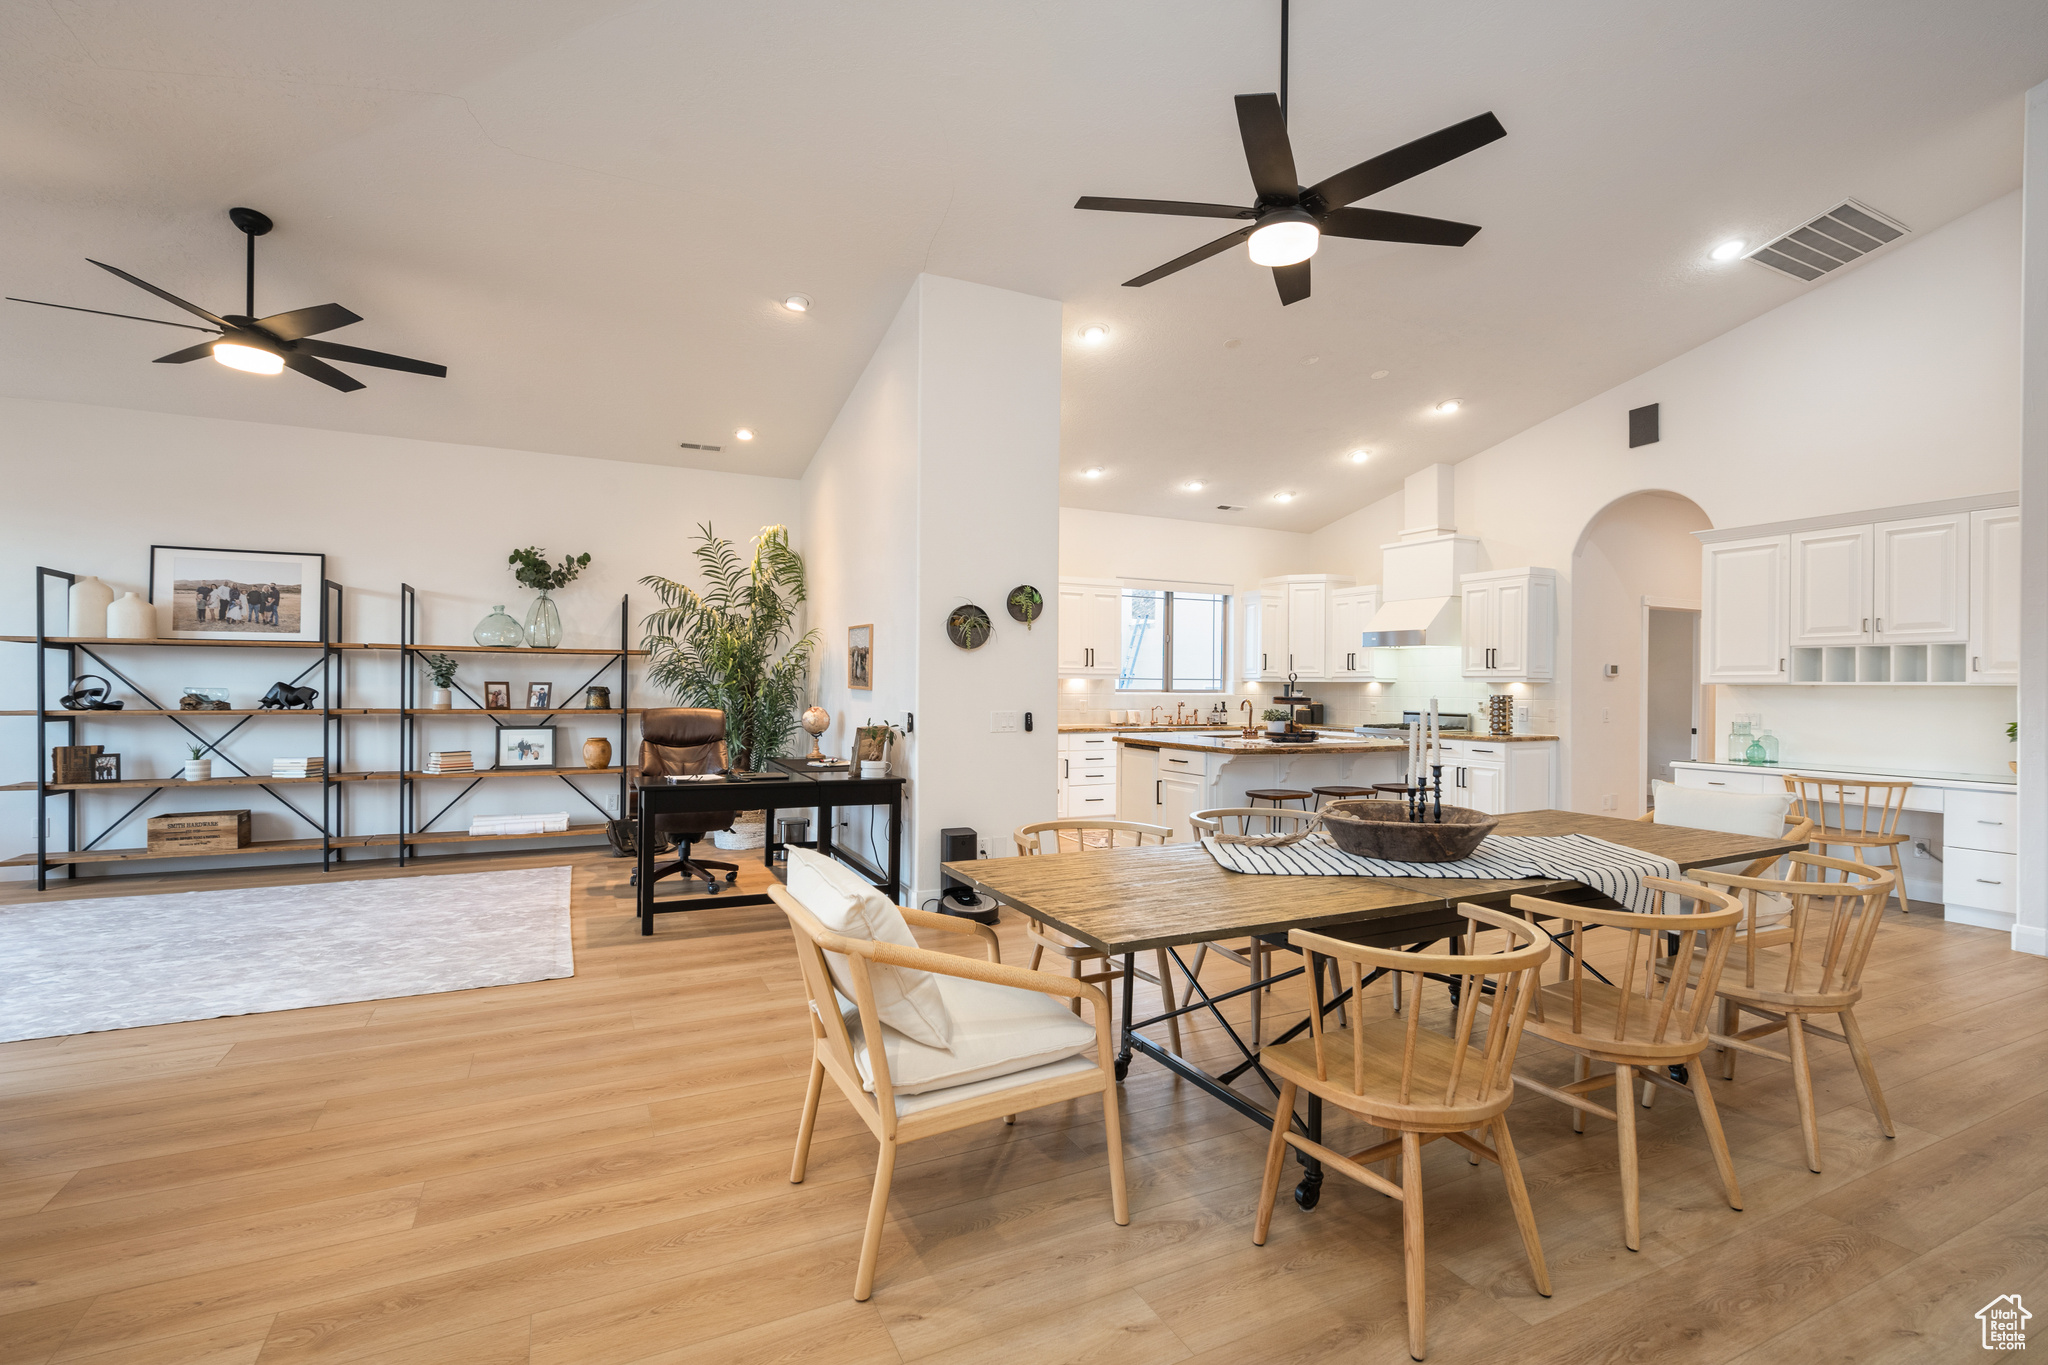 Dining space featuring light wood-type flooring, ceiling fan, and high vaulted ceiling